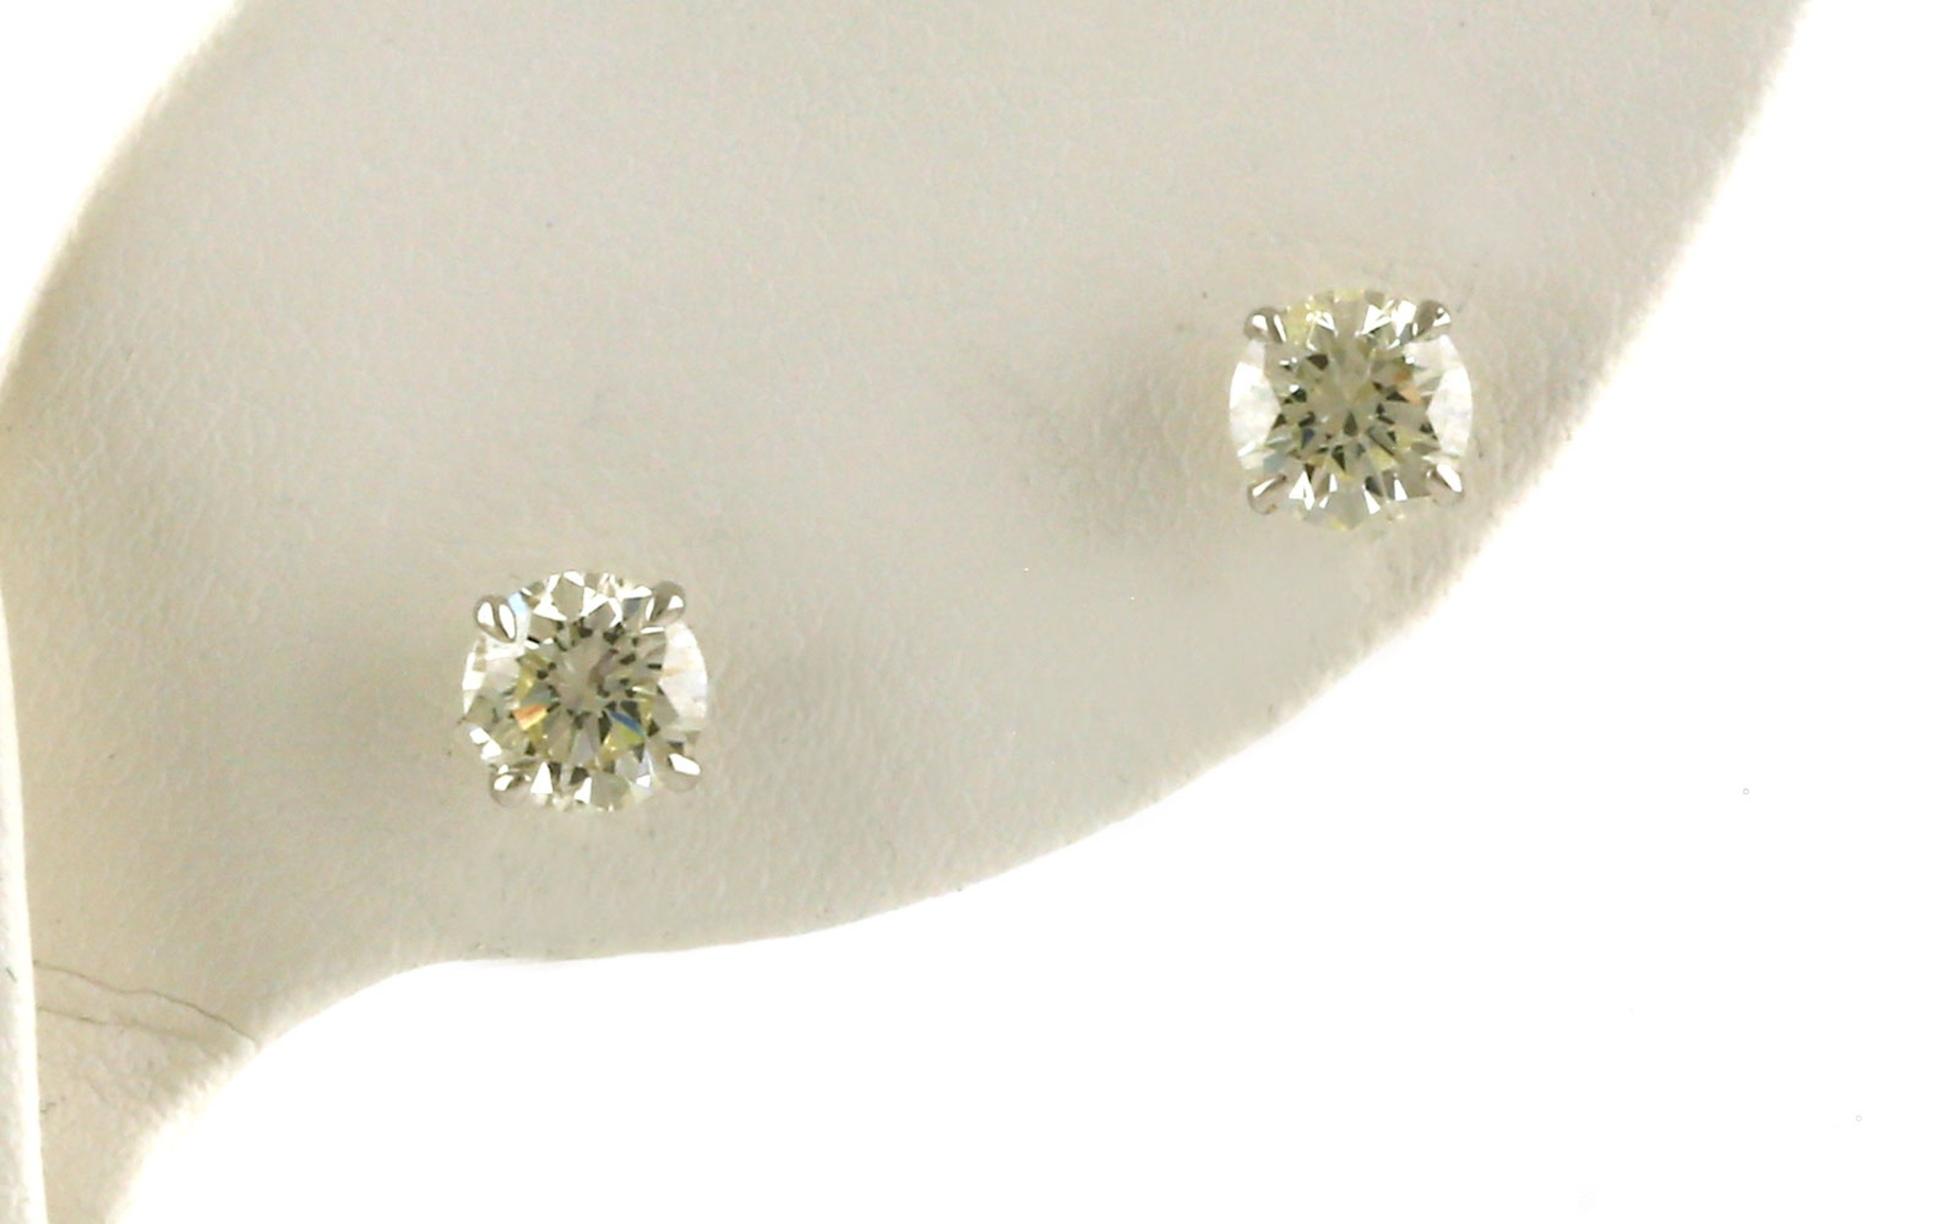 4-Prong Diamond Stud Earrings in White Gold (1.21cts TWT)